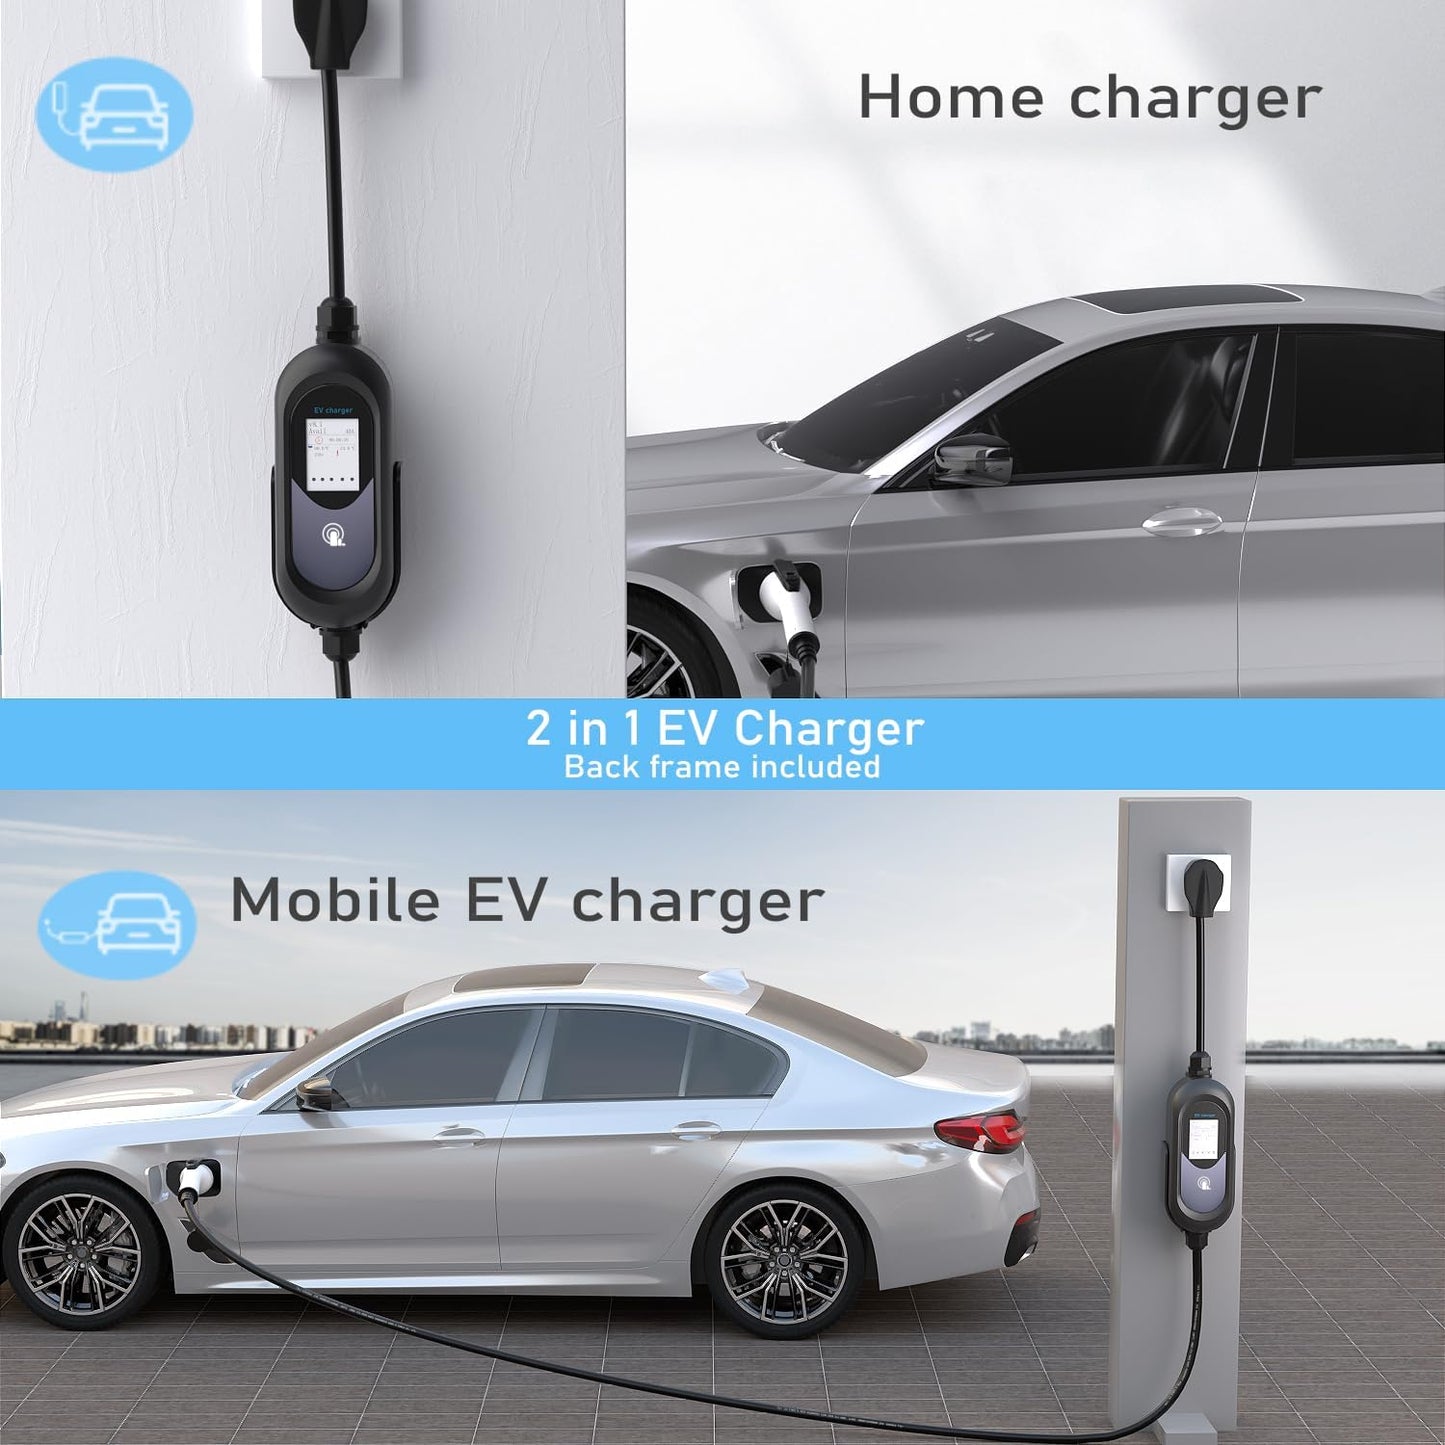 EVCONN Level 2 EV Charger, 40A 240V 23ft NEMA 14-50P, 2in1 EV Charger for Home Level 2 & Portable Electric Car Charger with Adjustable Current/Timing, CE FCC UL Certification for All J1772 C